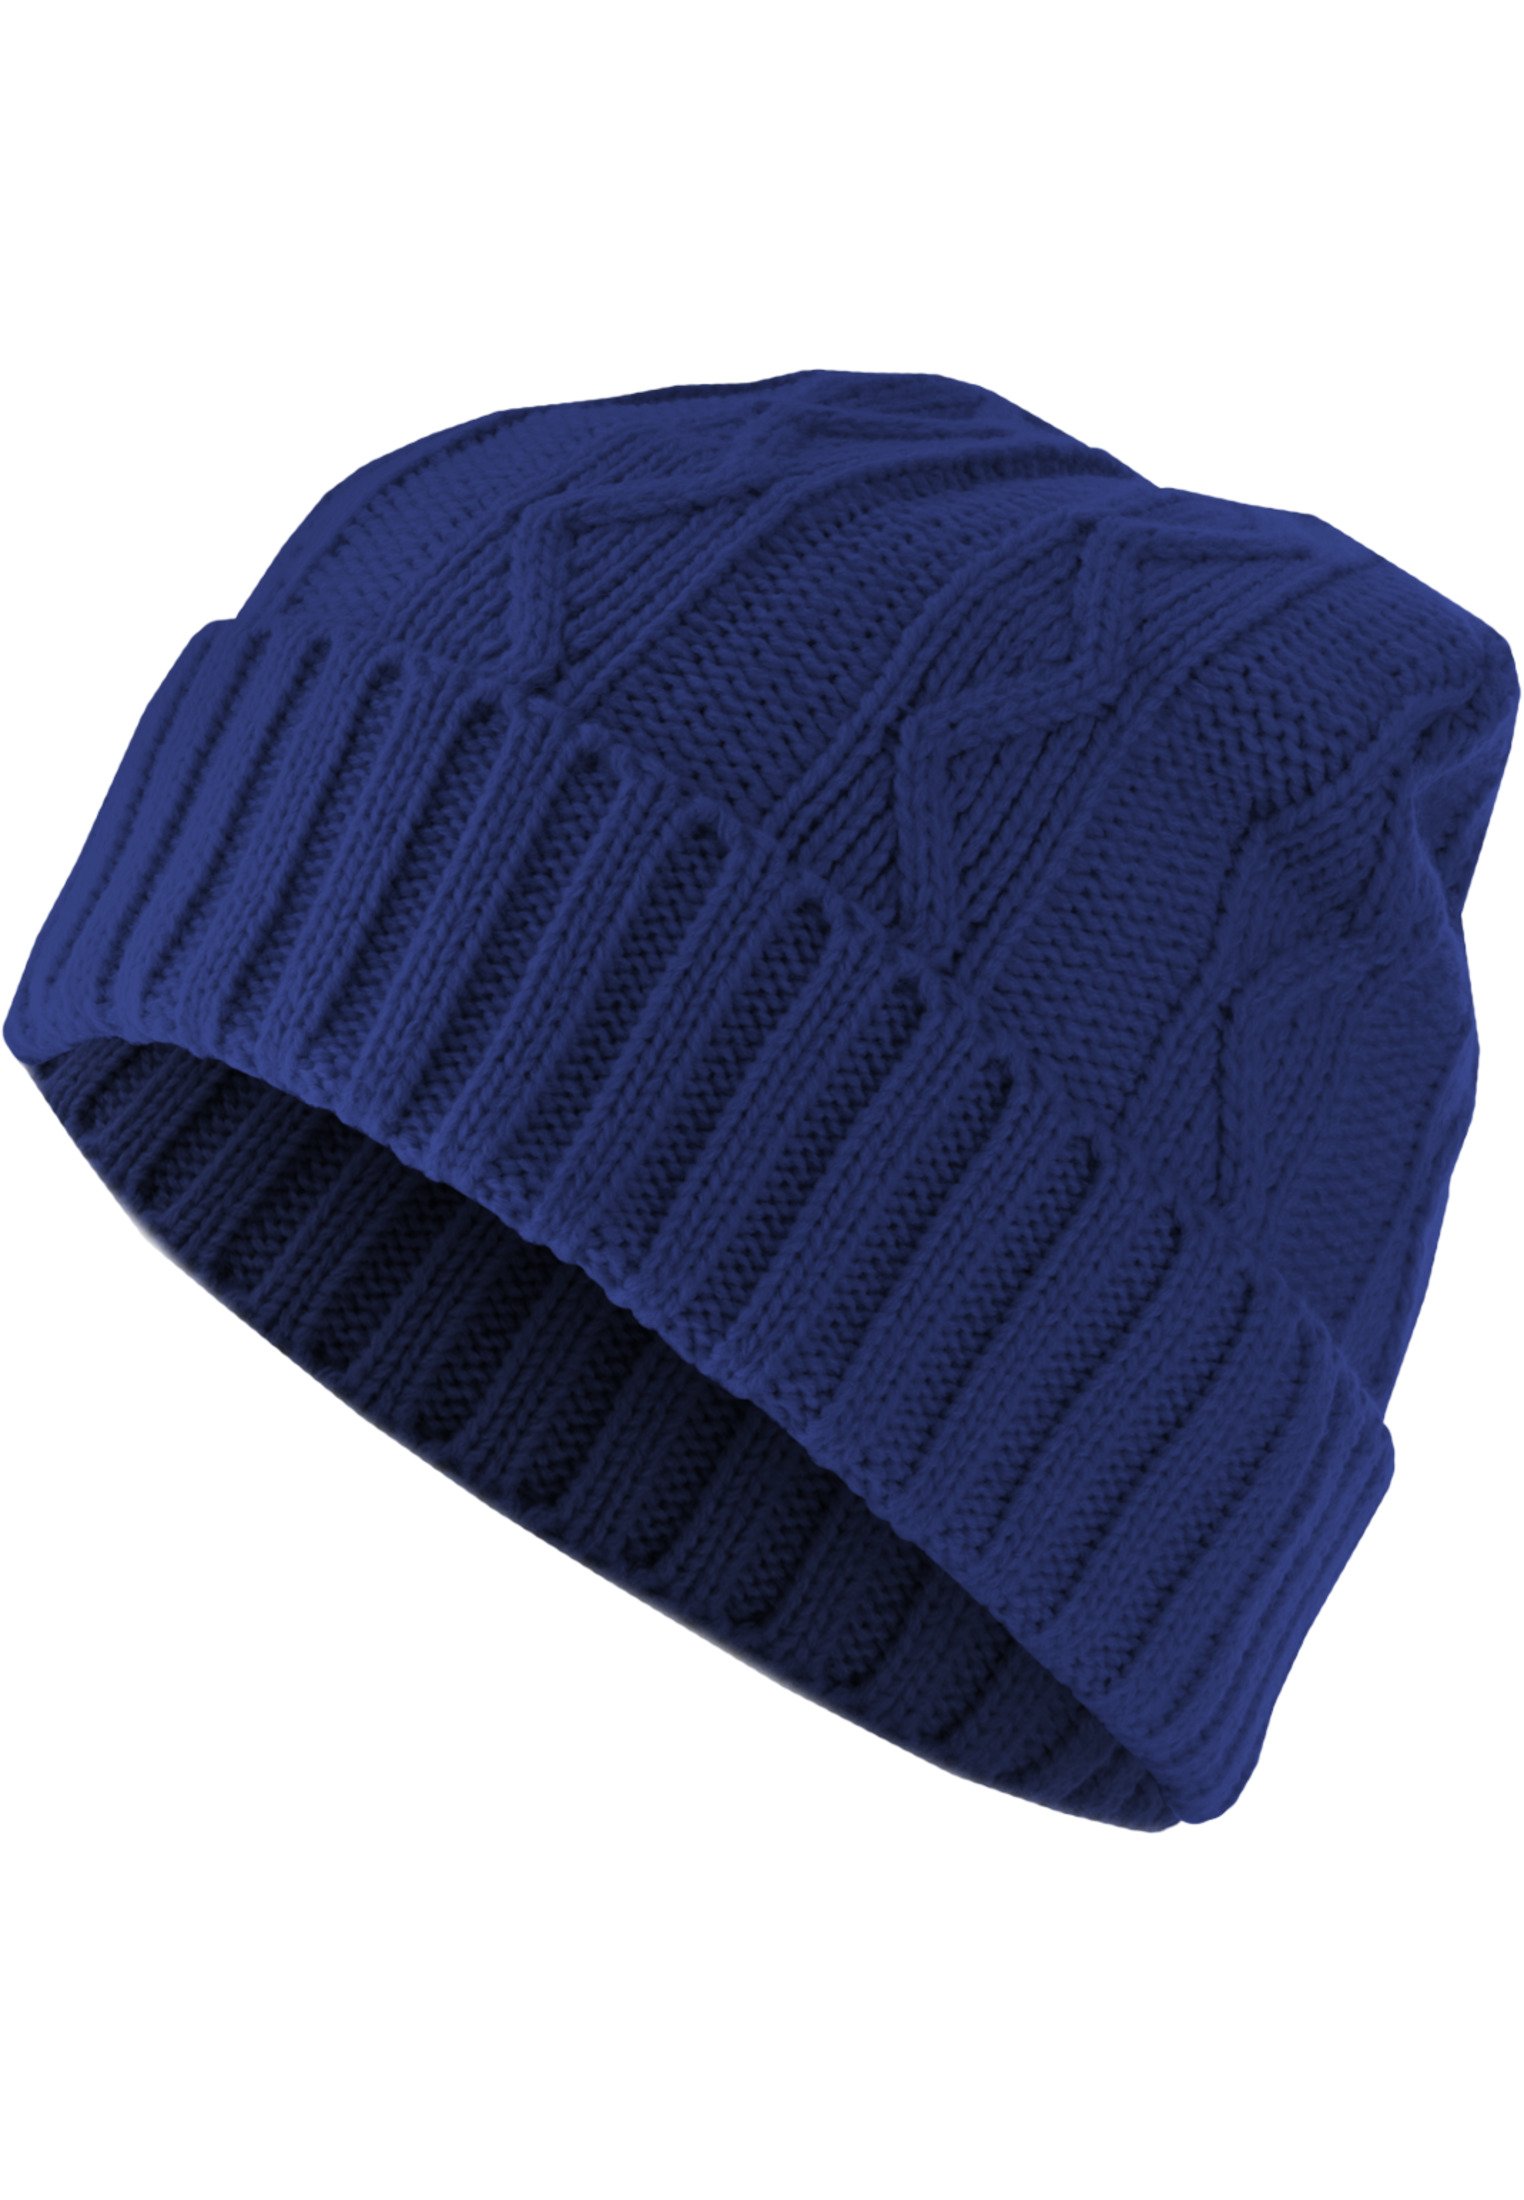 Beanie Cable Flap royal one size